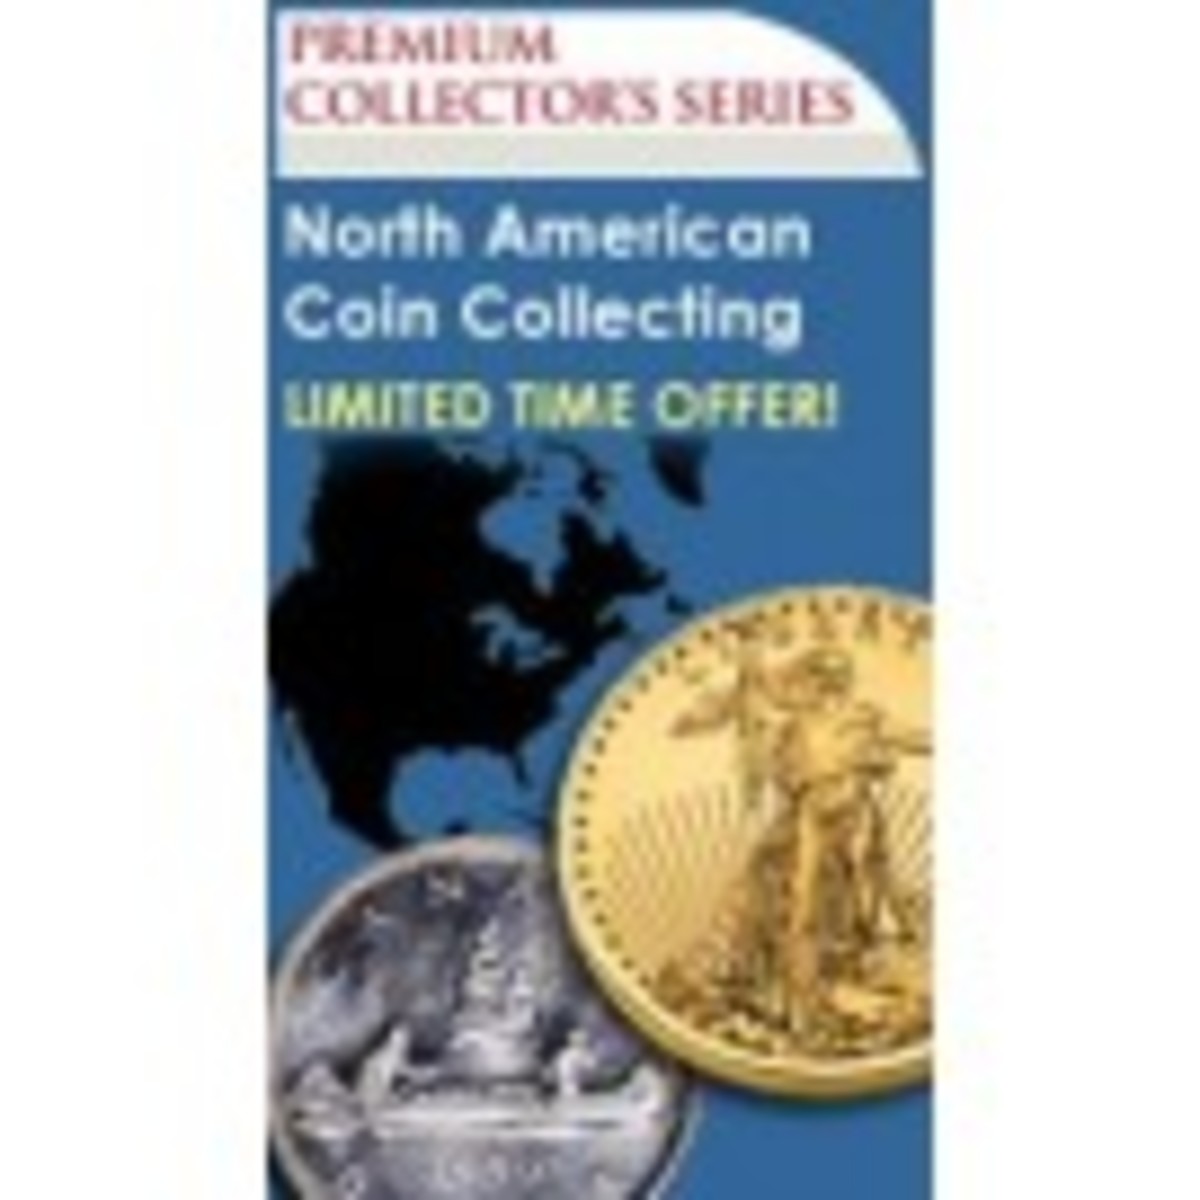 Premium Collector's Series: North American Coin Collecting